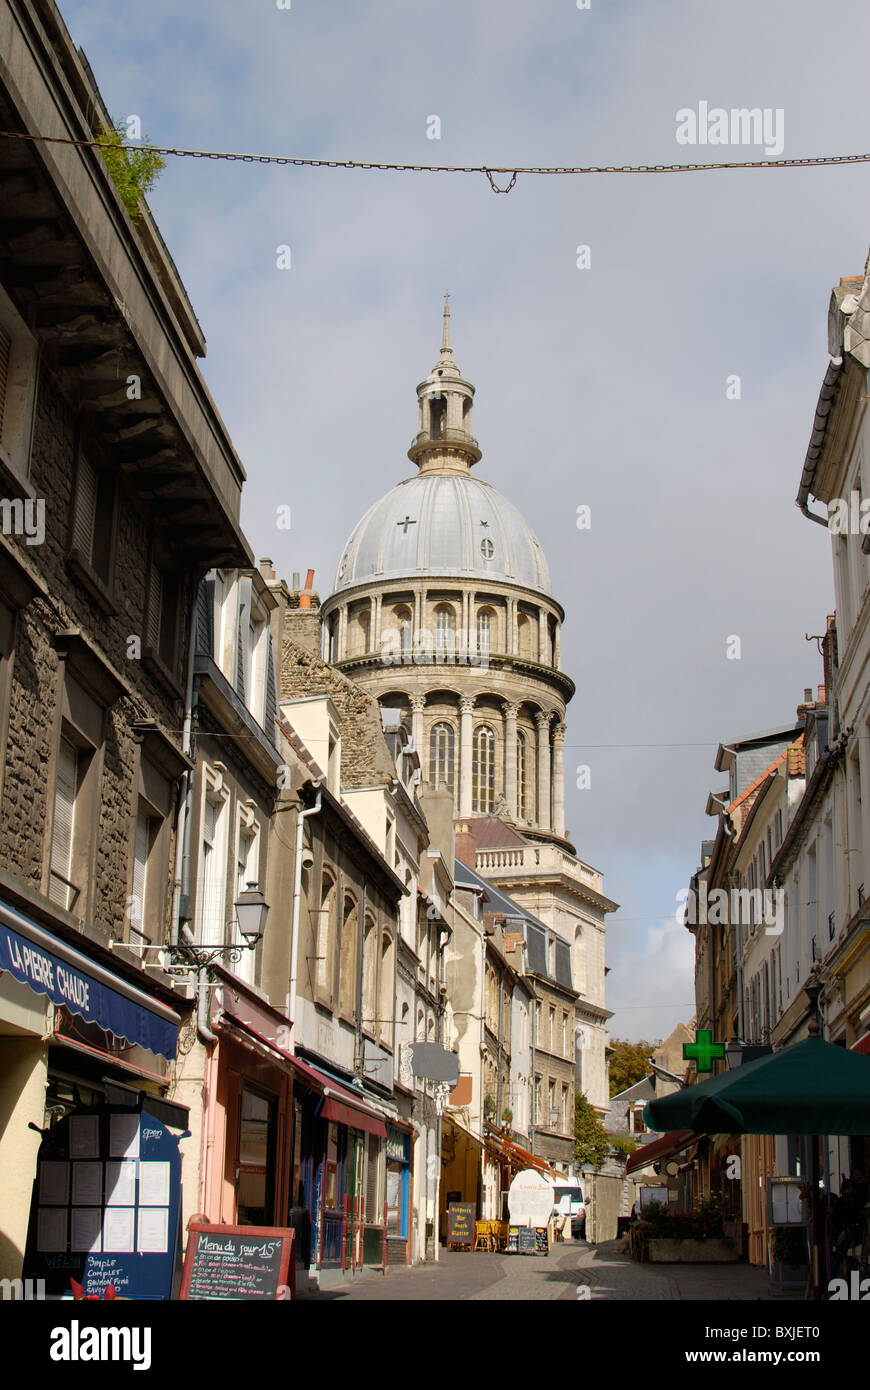 Main street in Old Walled town of Boulogne. Pas de Calais. France. Cathedral of Notre Dame. Stock Photo